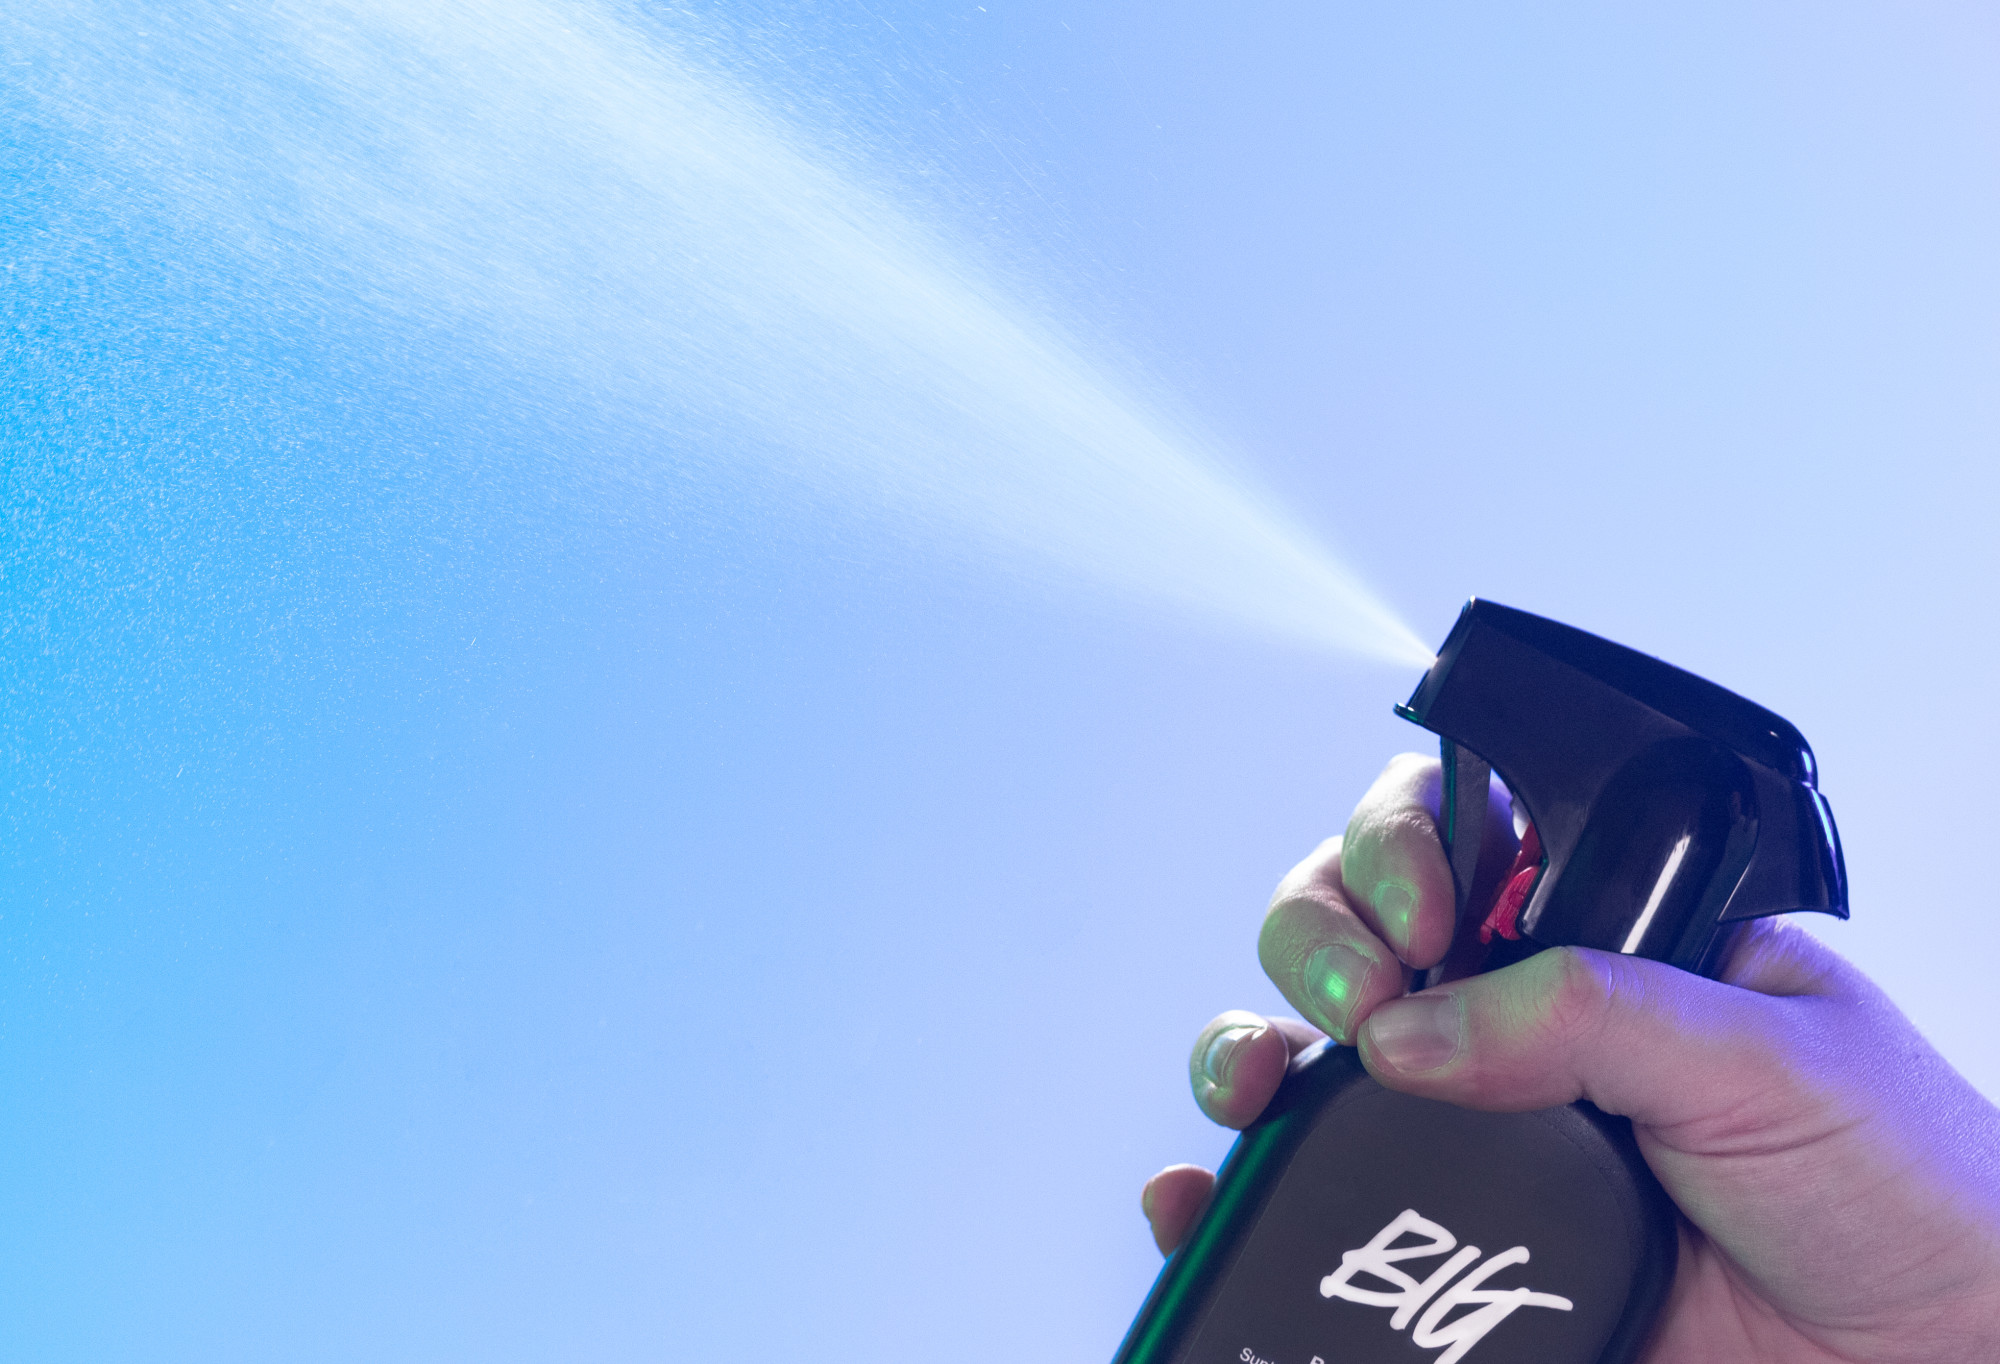 Big body spray is sprayed up into the air, in front of a vibrant light blue background.